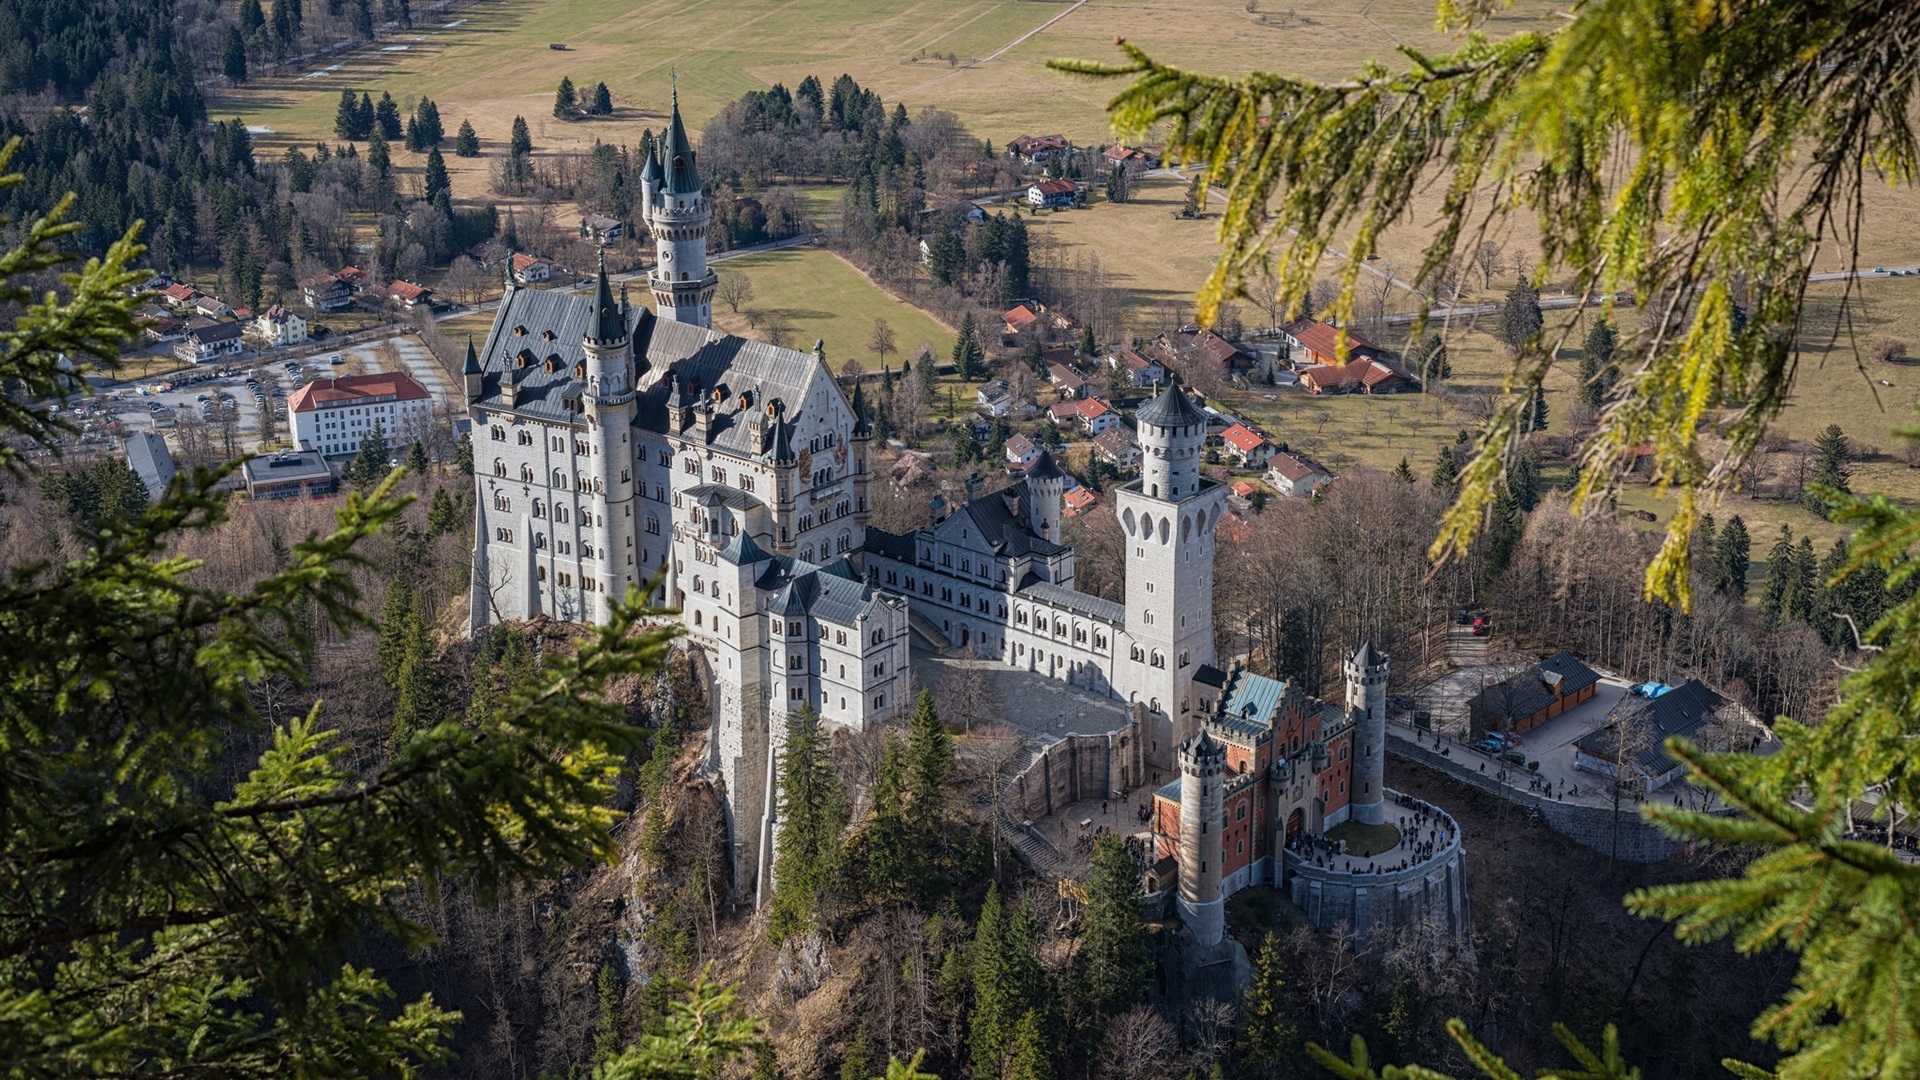 General 1920x1080 Germany Bavaria Neuschwanstein Castle castle building house forest trees landscape nature grass daylight aerial view people car street tower gates